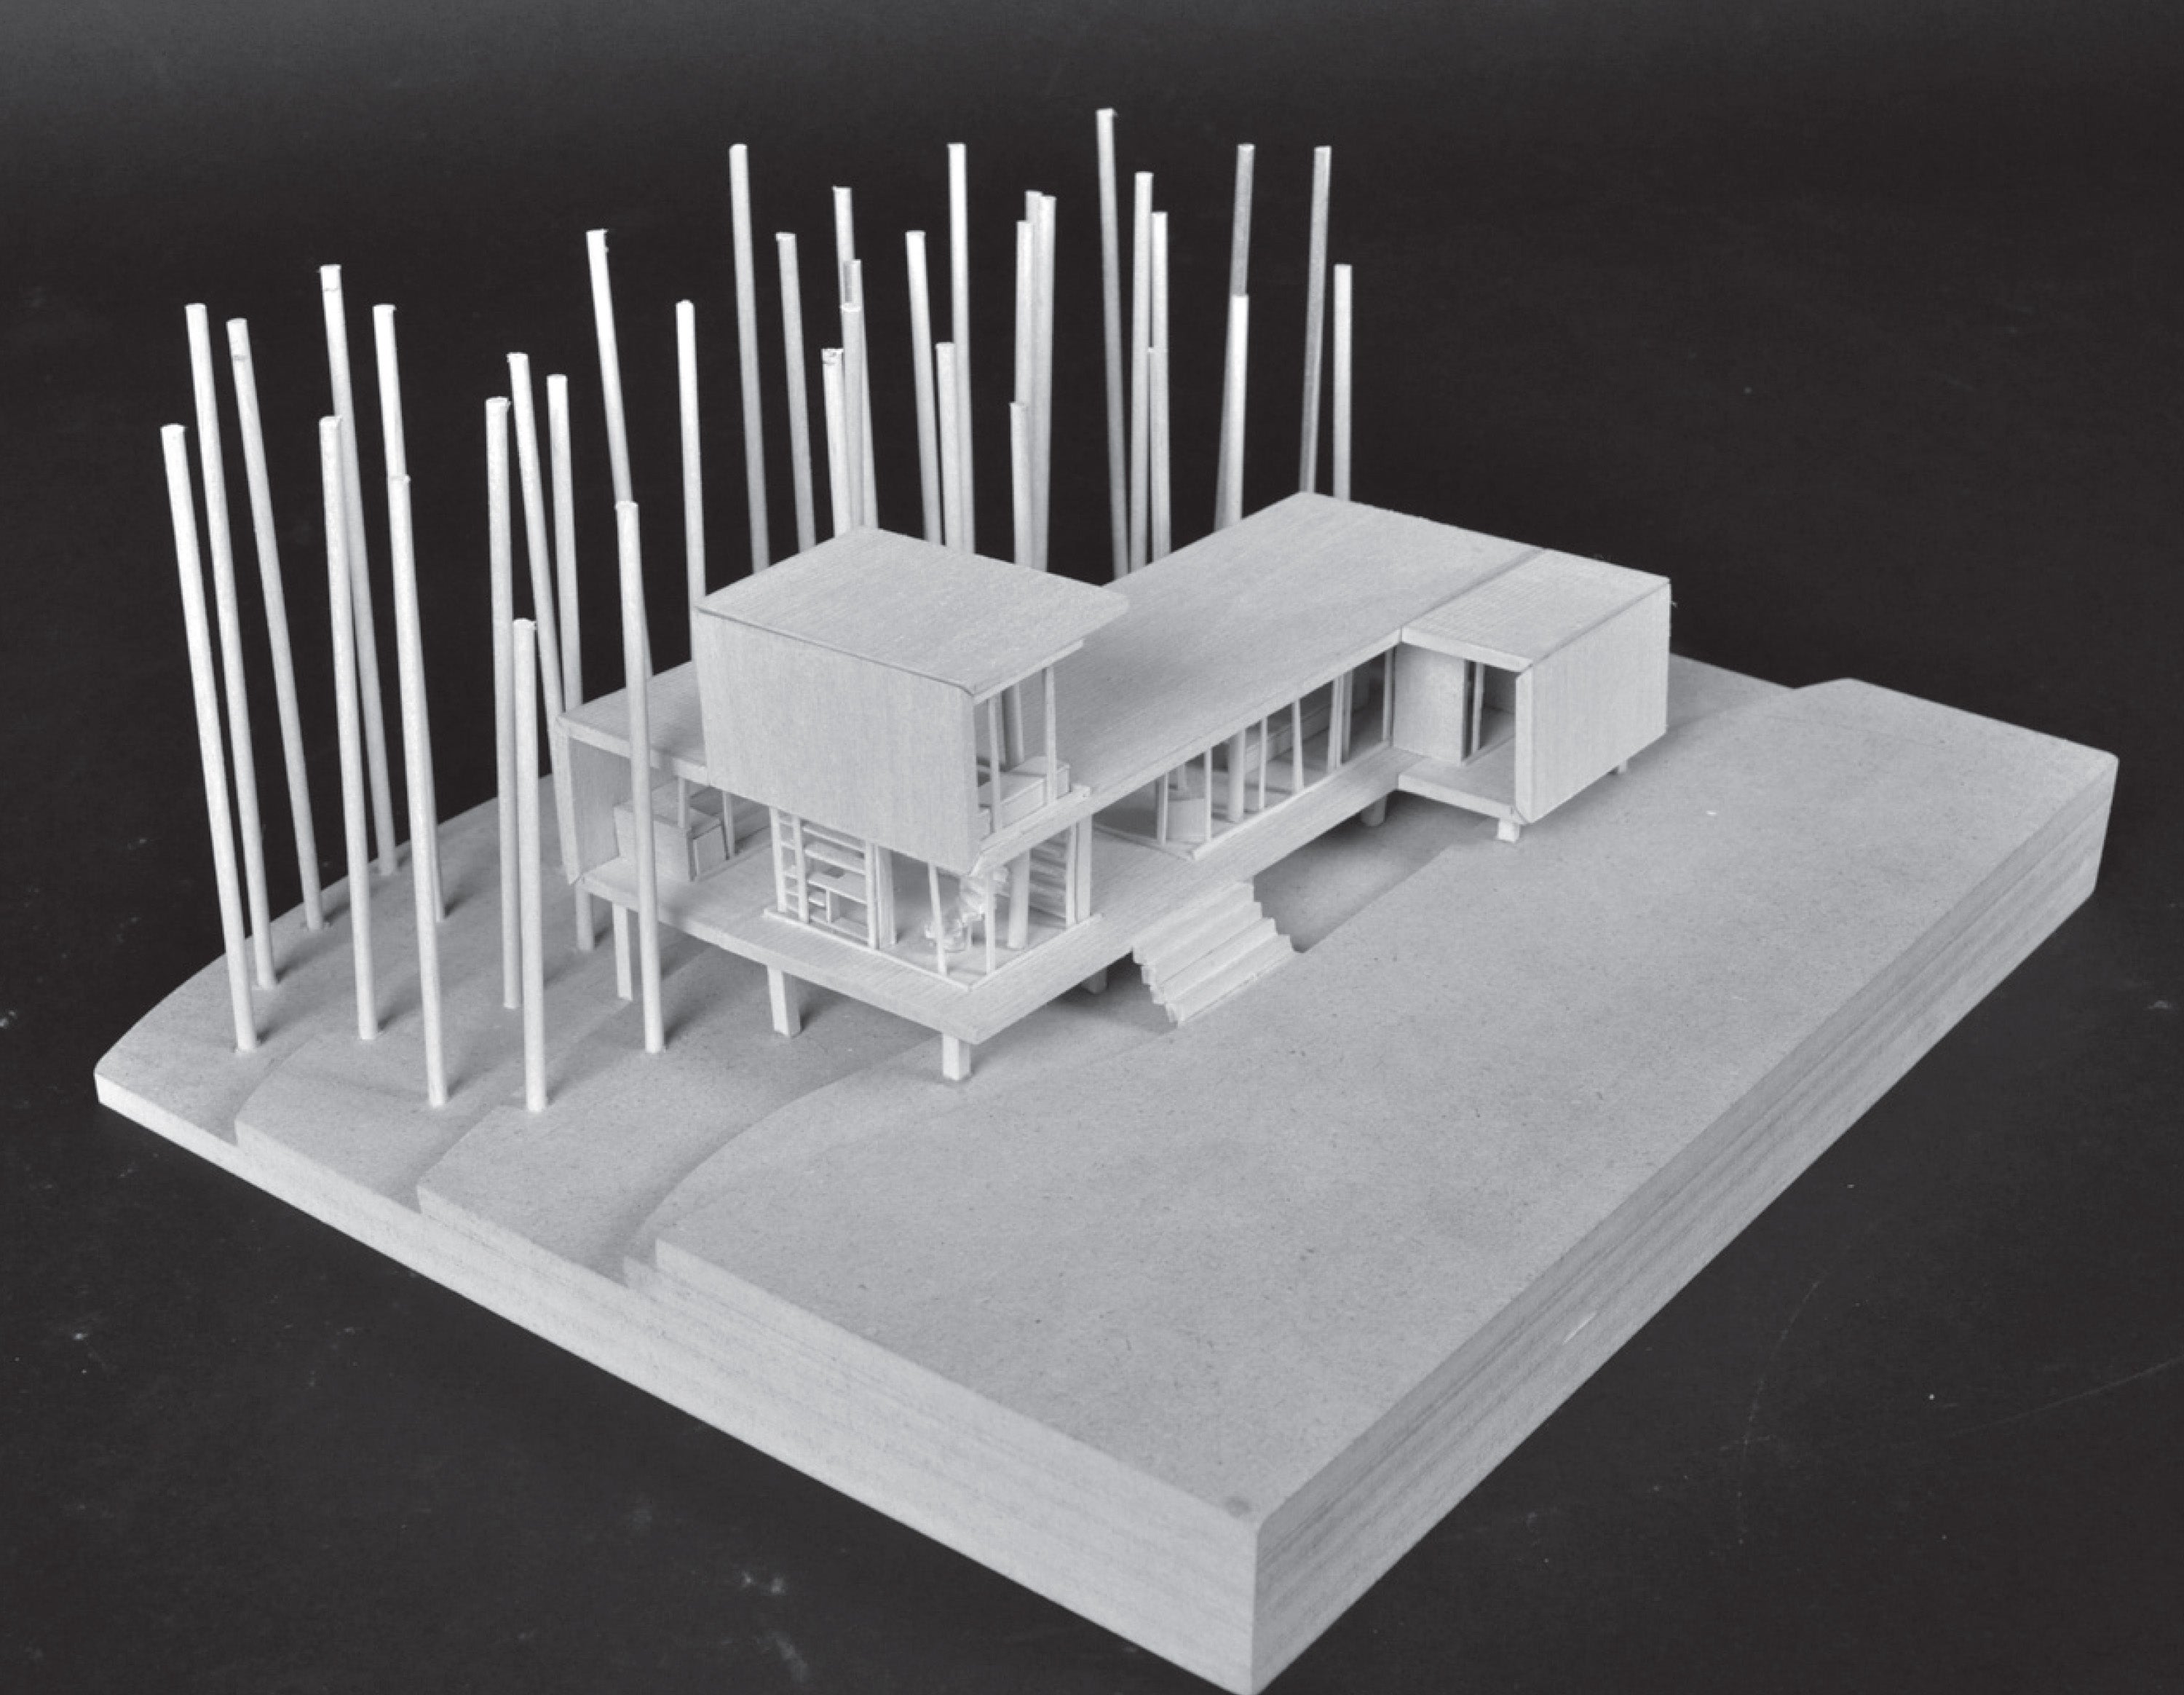 A wooden physical model of the house design. The house is on a sloped hill, with a number of trees surrounding the backyard.